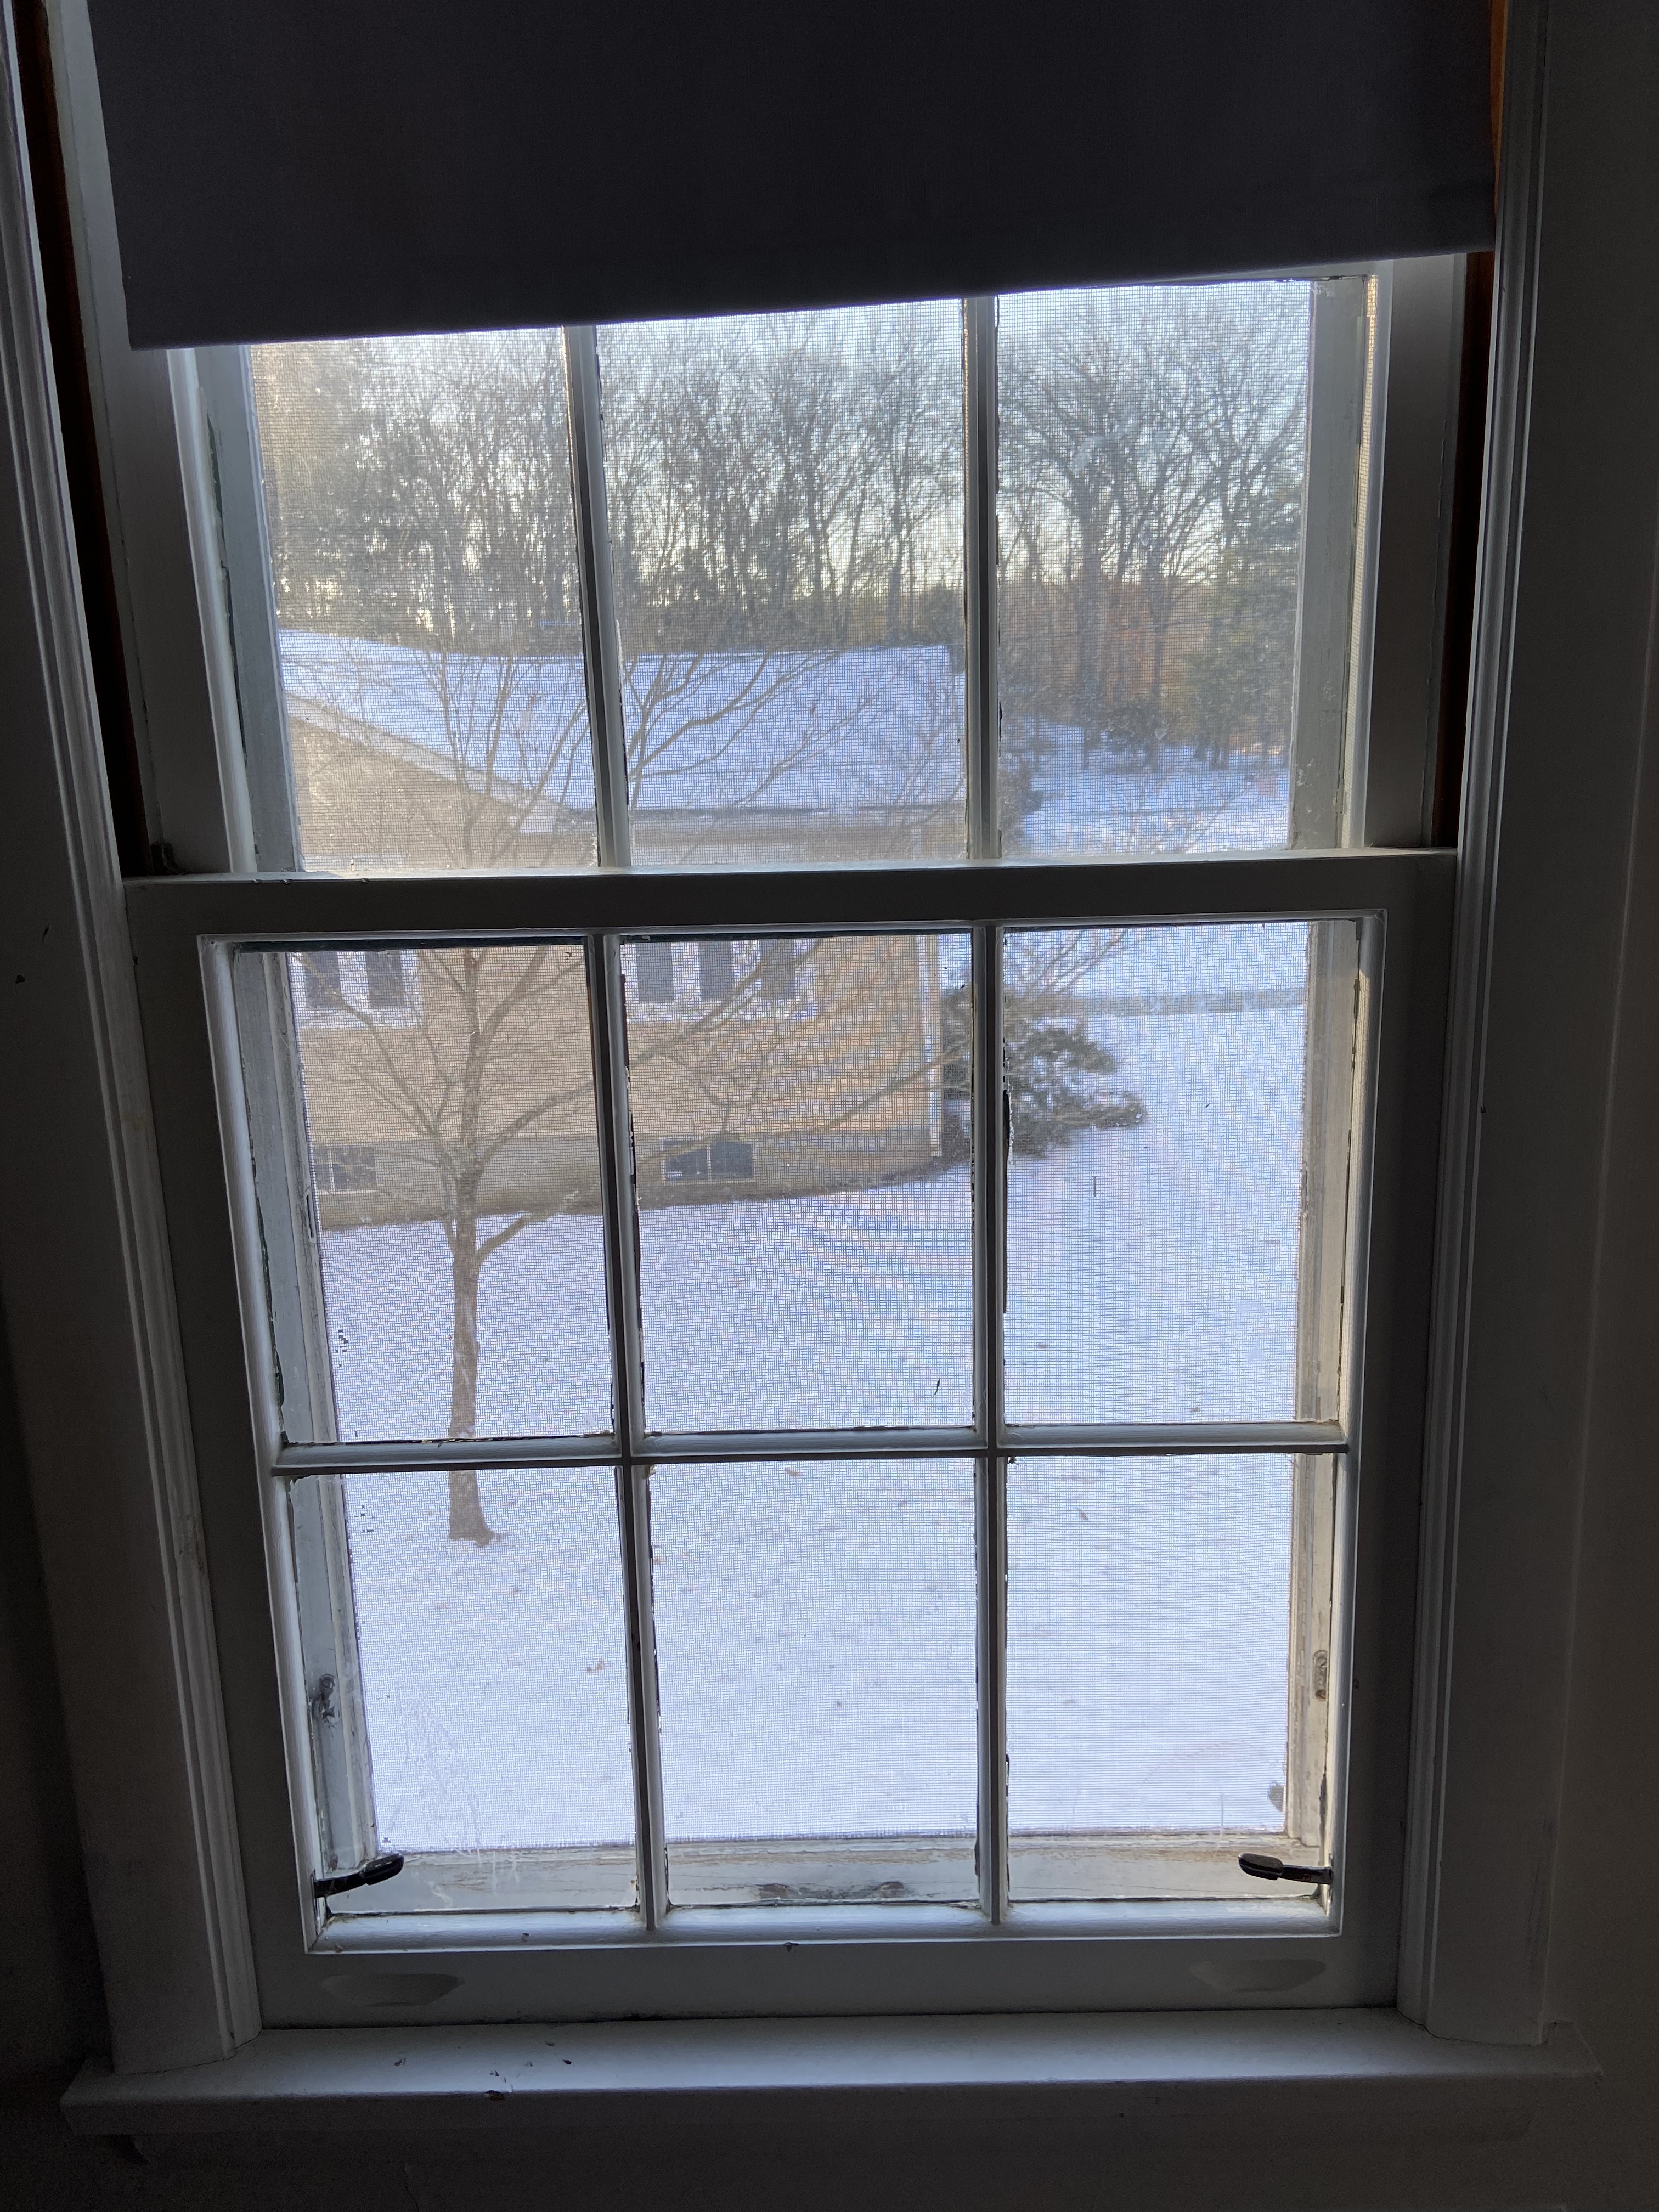 This is a view outside to a snowy landscape. Outside the window is the side of a yellow house